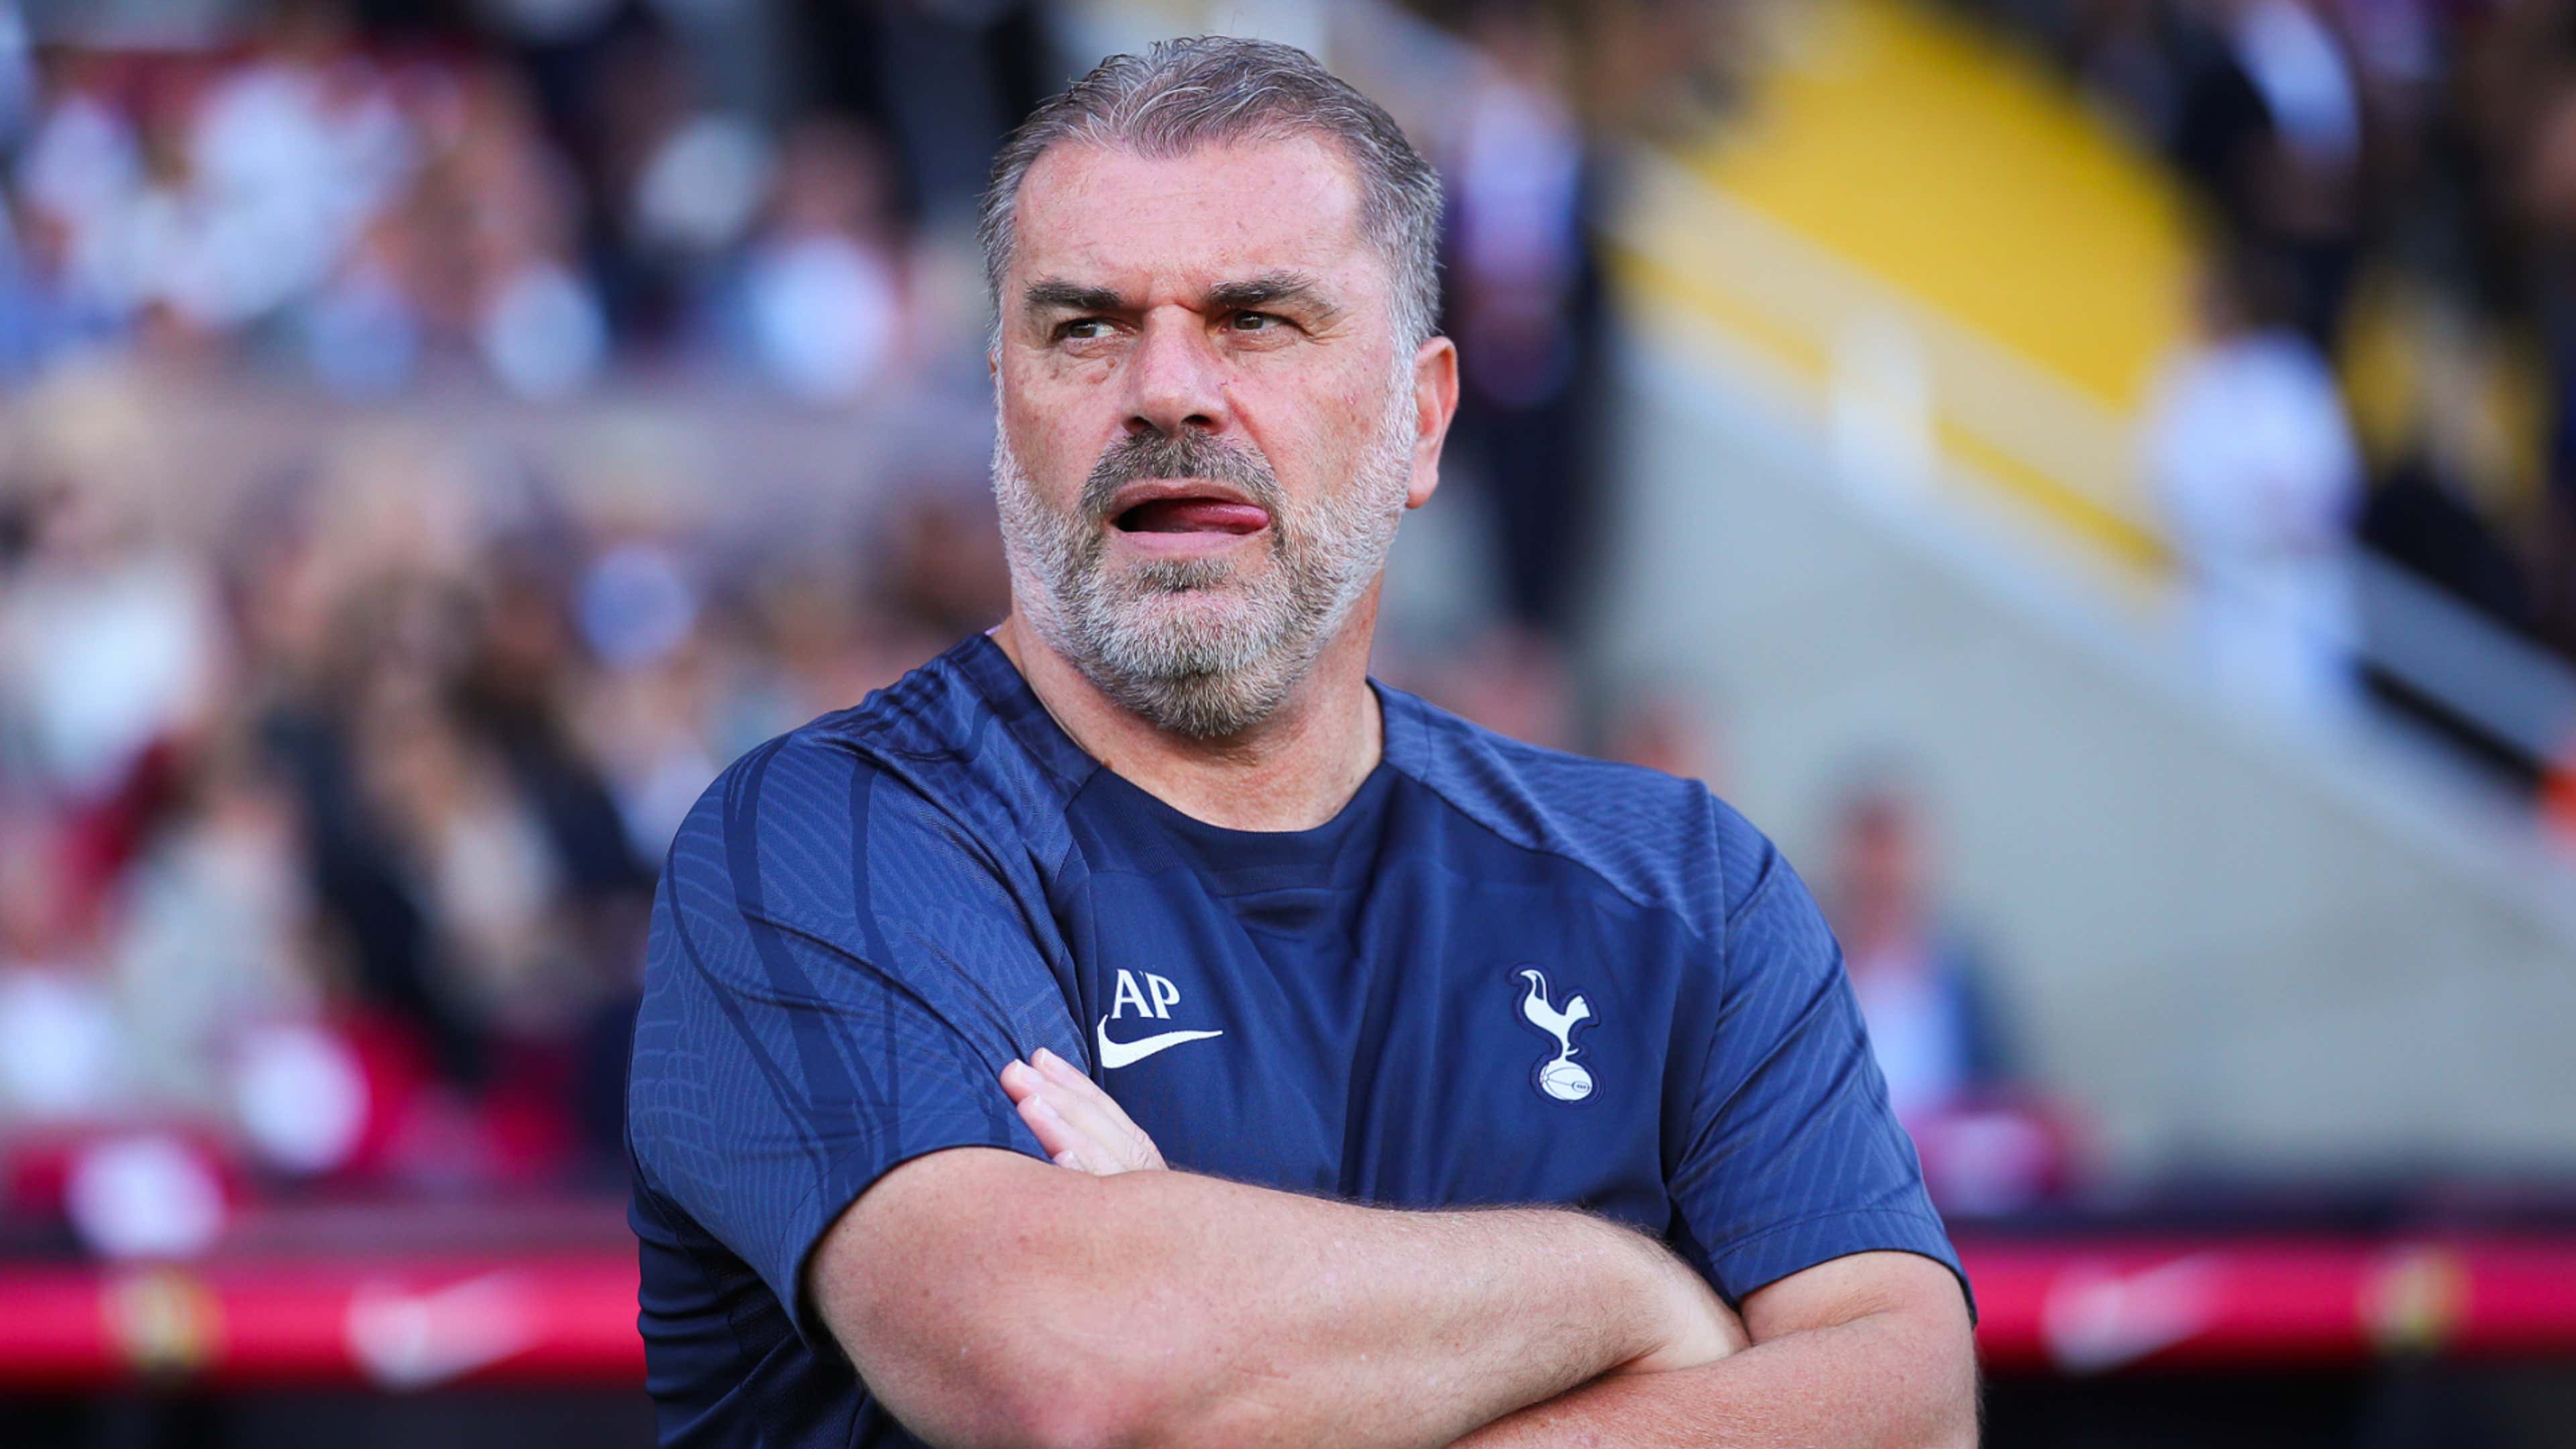 The Carabao Cup was my priority' - Ange Postecoglou 'disappointed' after  Spurs' trophy route closes early with second-round loss to Fulham | Goal.com